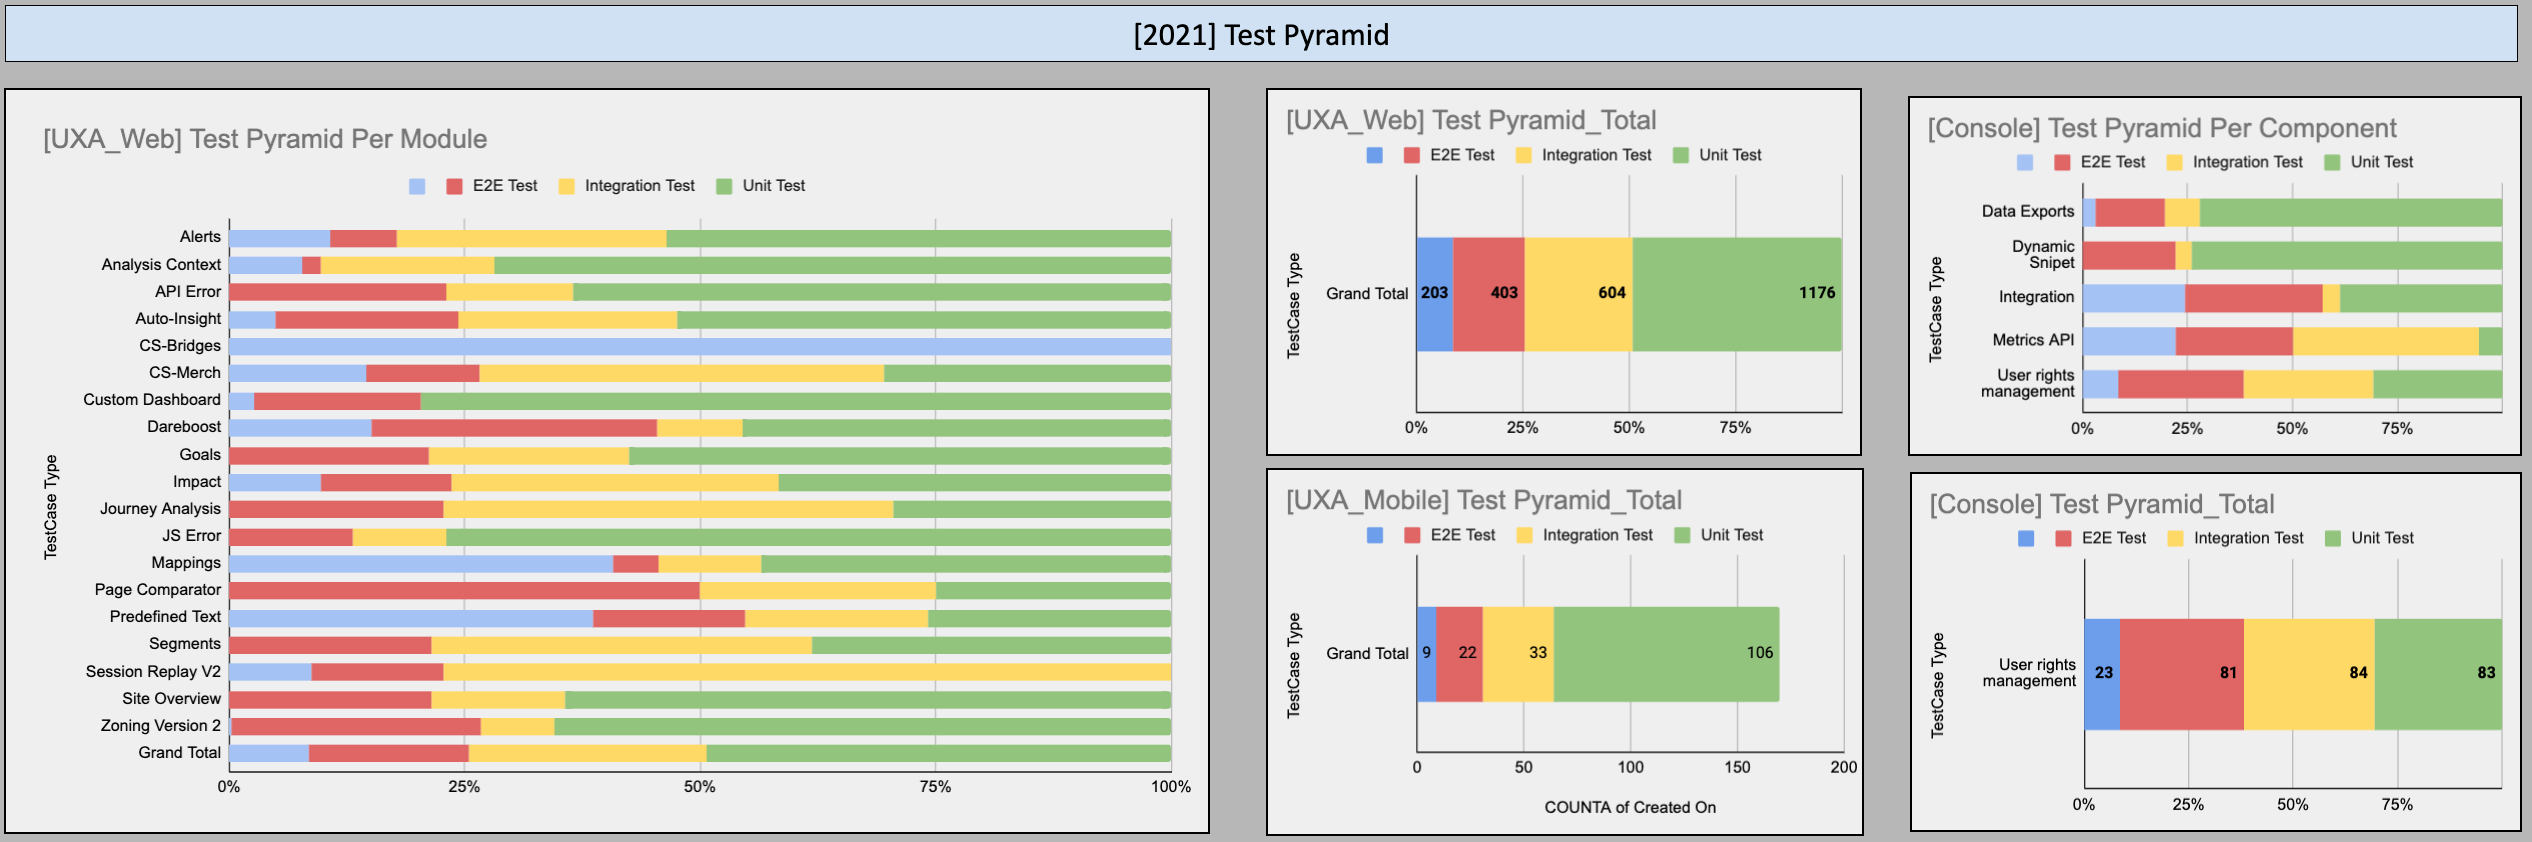 The Outcome of the Theoretical Exercise of the Test Pyramid